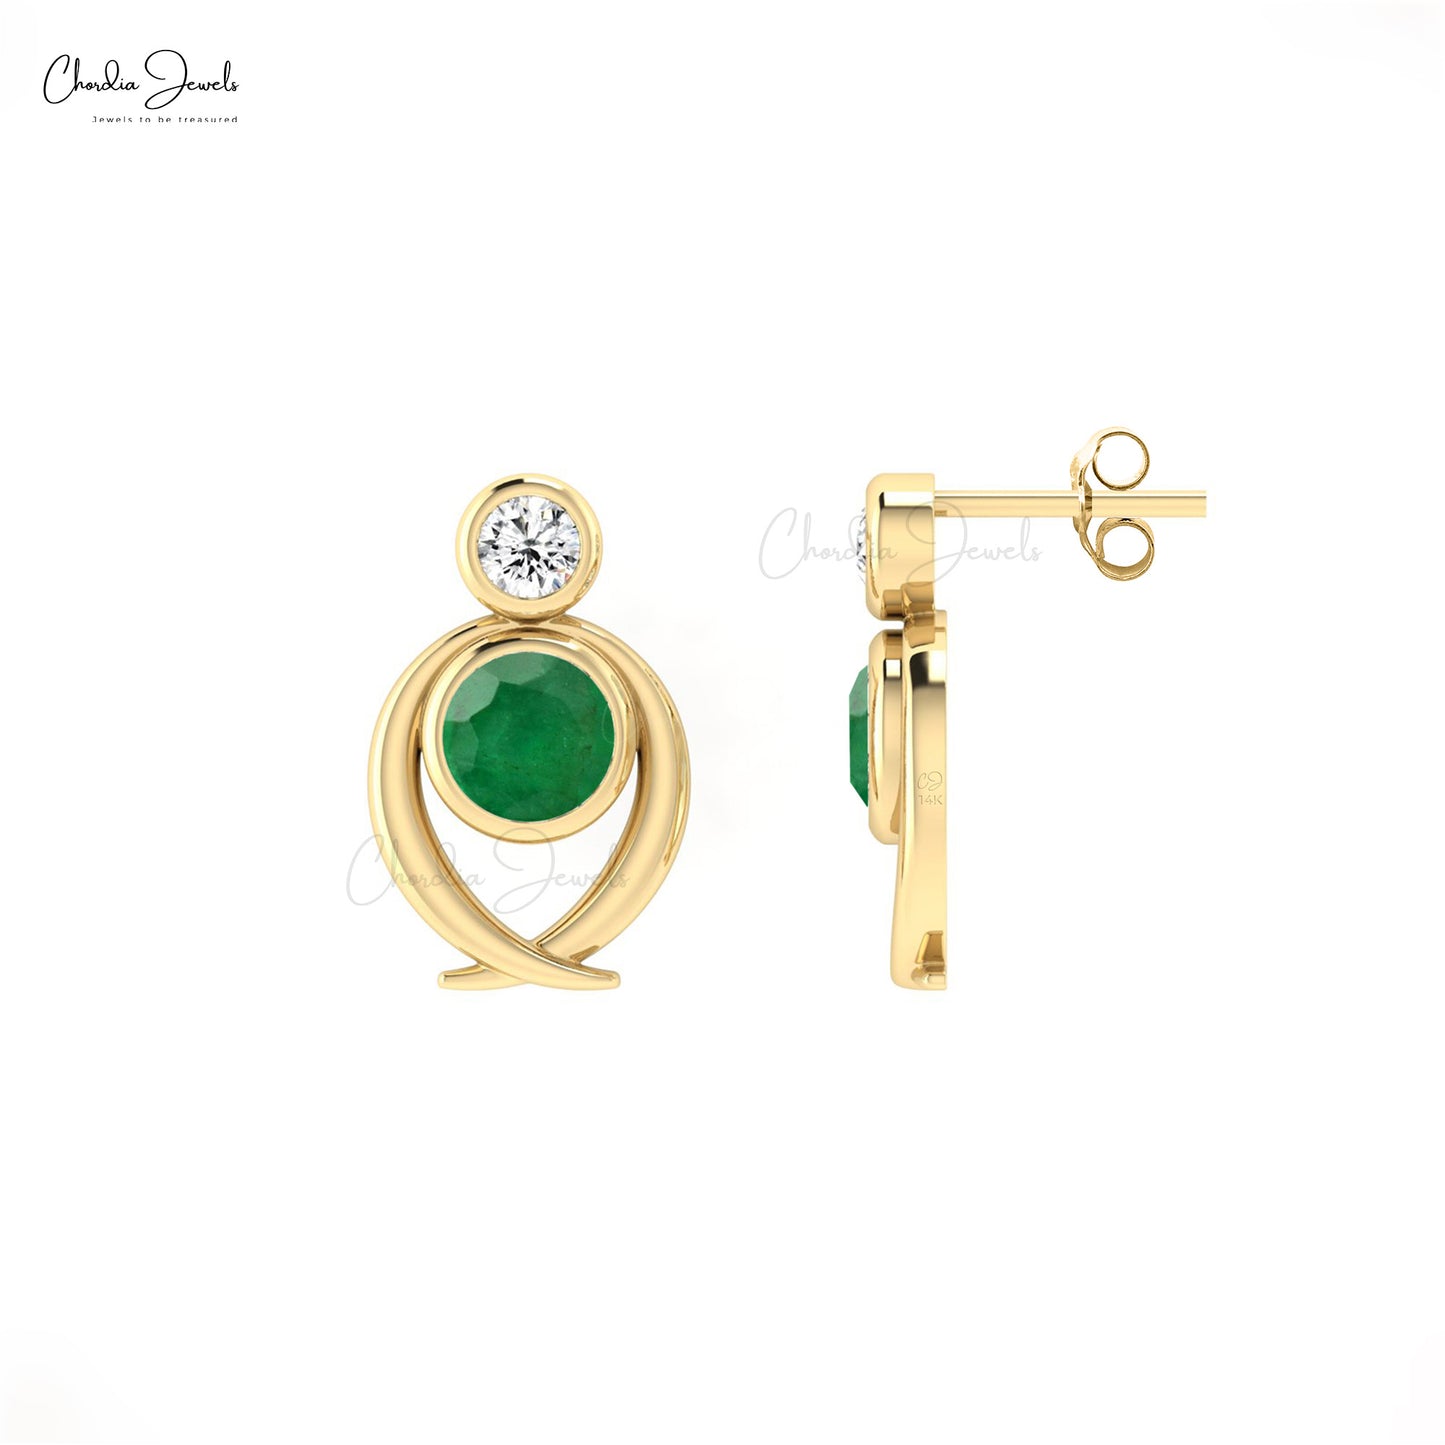 Captivate hearts with emerald and diamond studs earrings